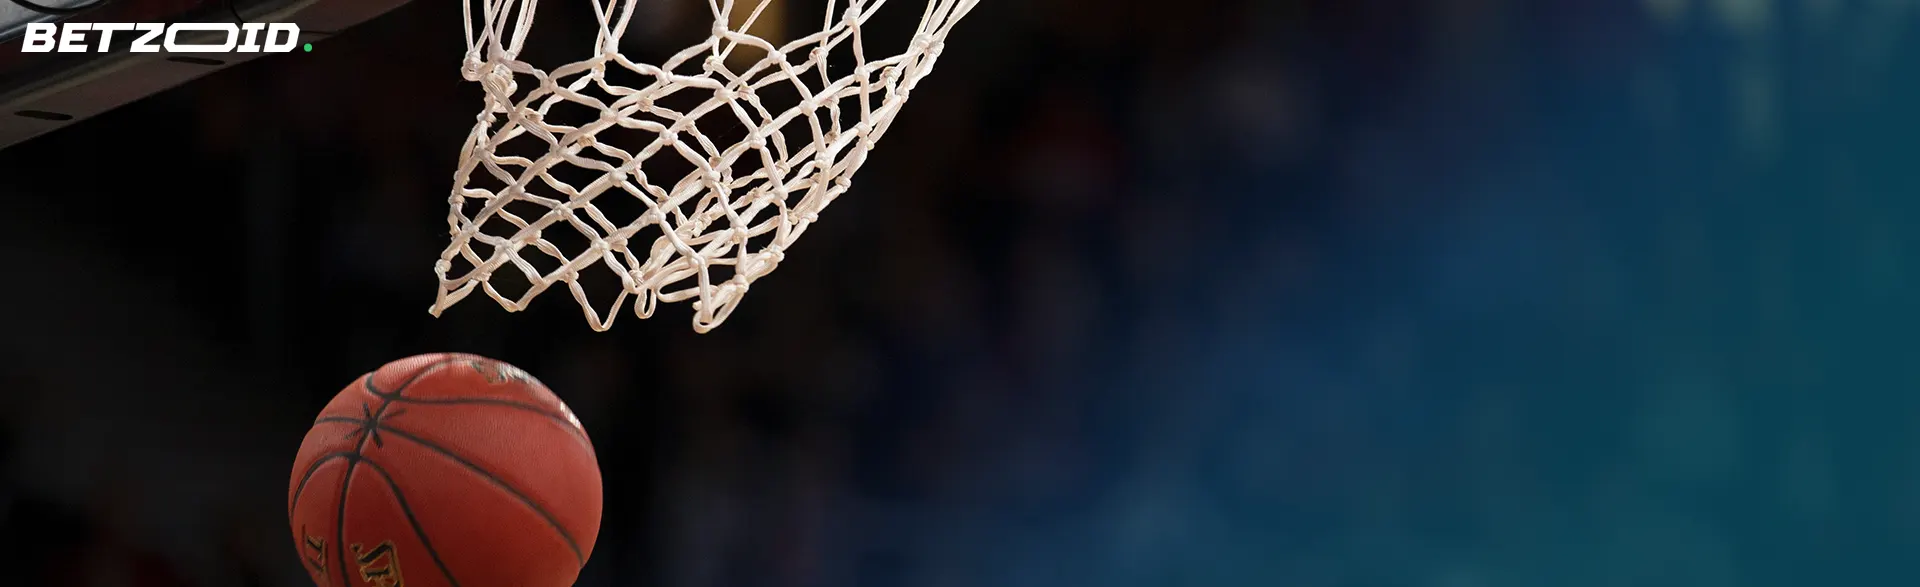 The ball hits the basketball hoop and it is a success for bettors.